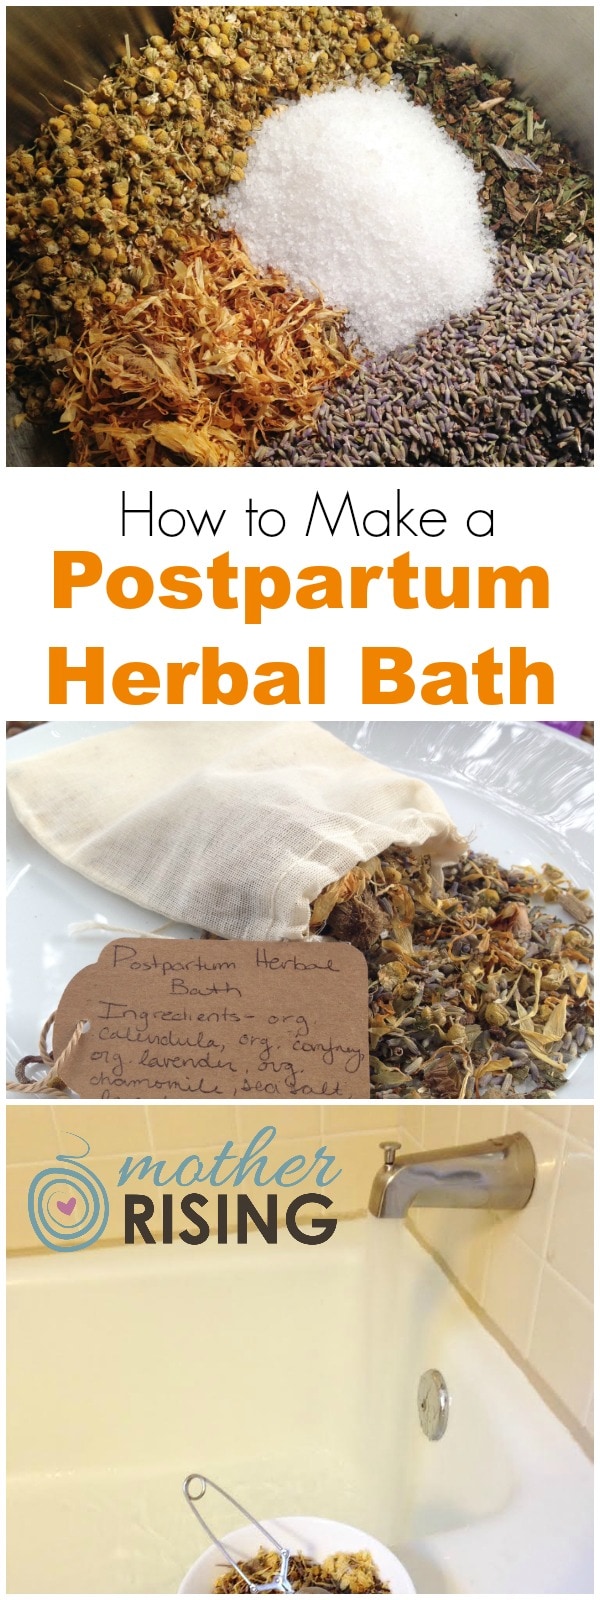 A postpartum herbal bath is a relaxing way to heal, soothe and restore oneself after the challenges of childbirth. Follow this recipe to make a herbal bath, padsicles or a postpartum herbal peri bottle.